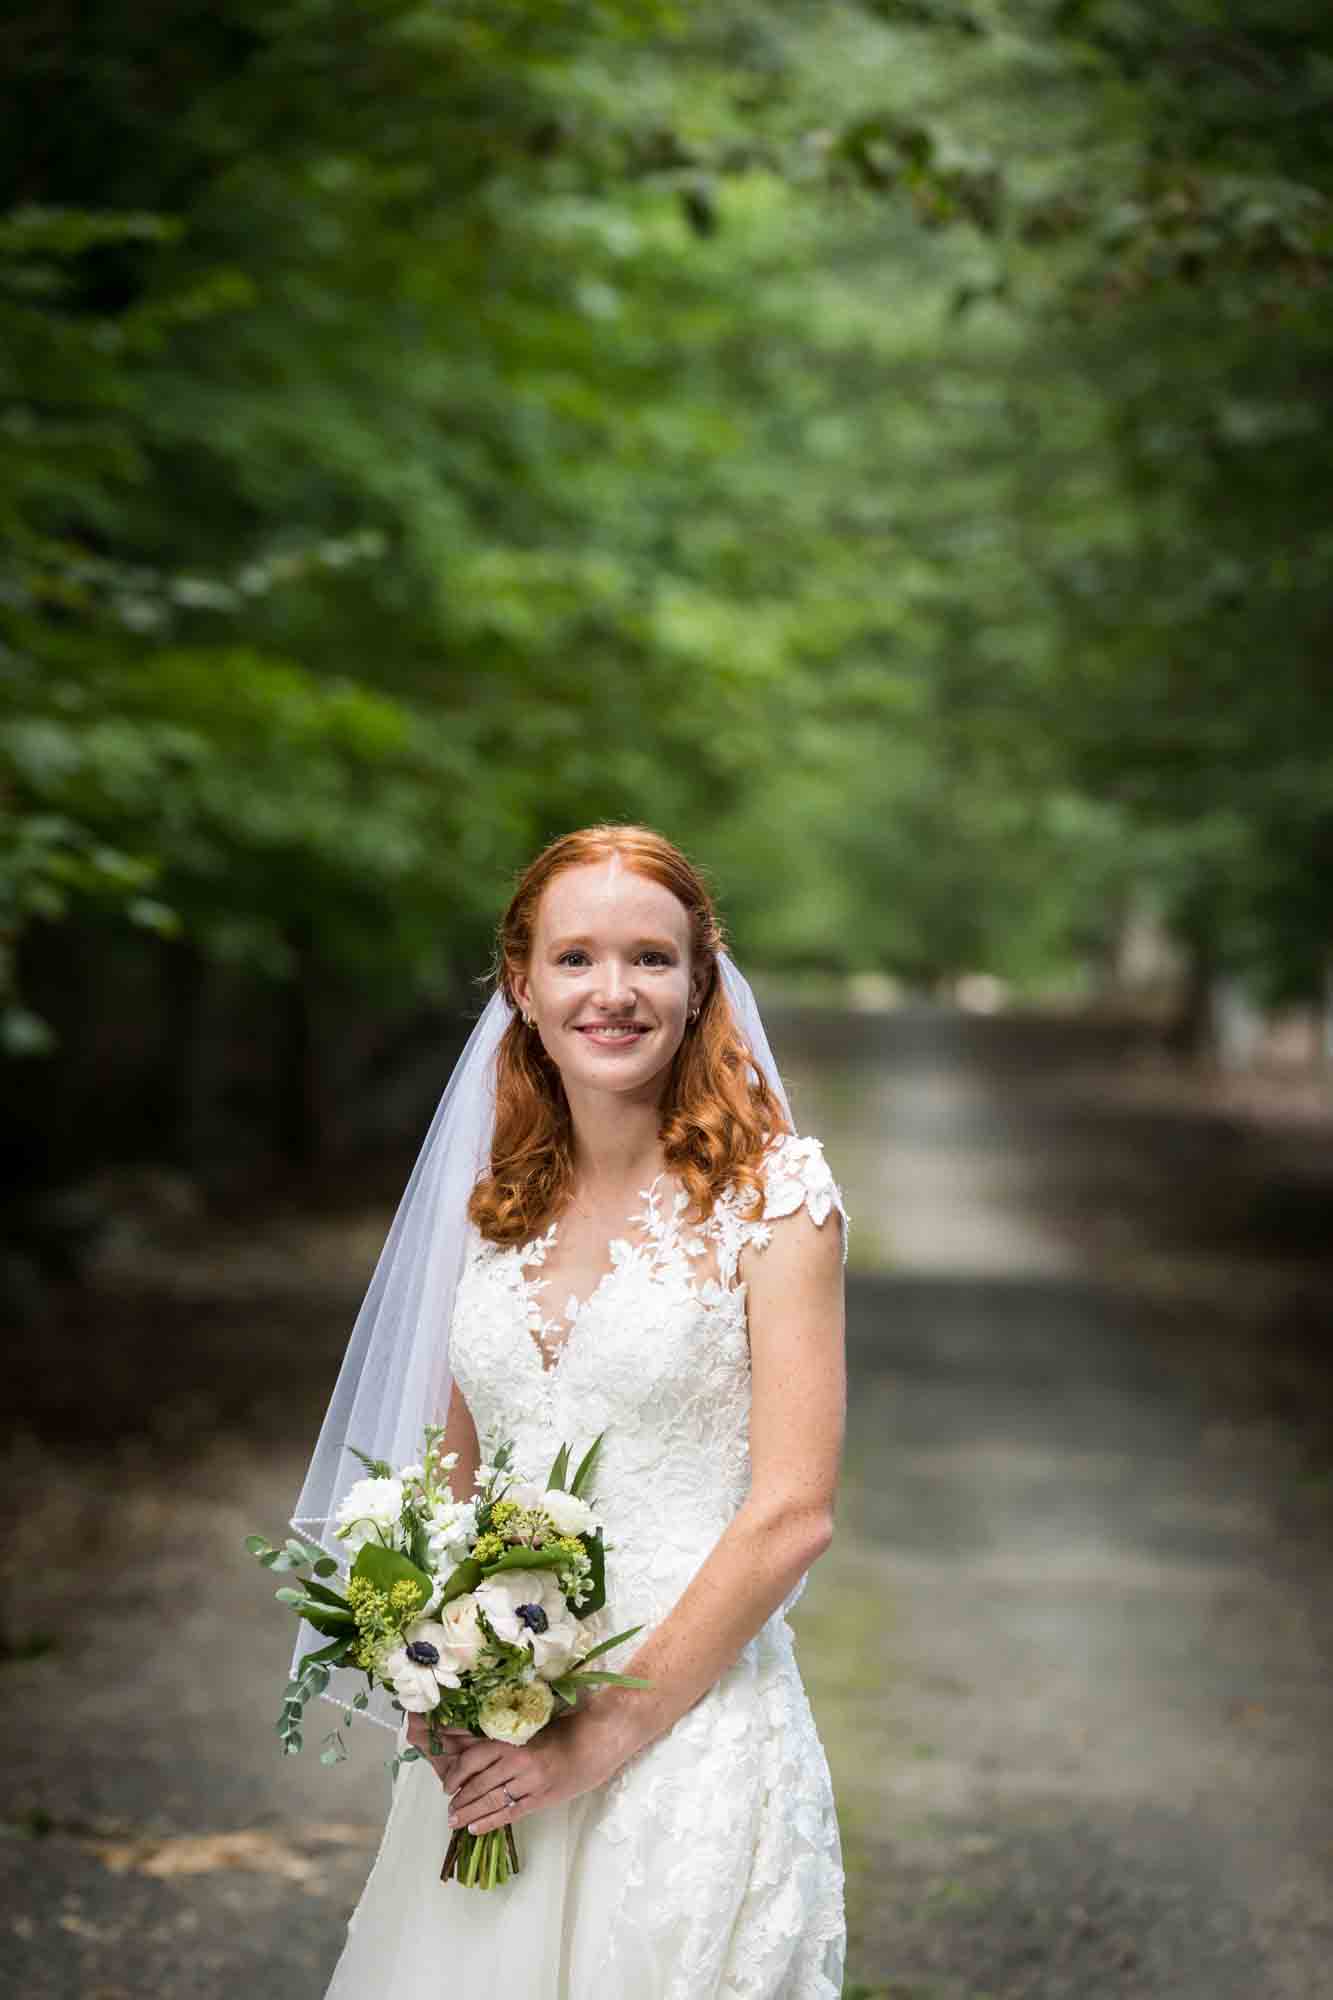 Bride with veil holding flower bouquet on dirt road for an article on backyard wedding tips